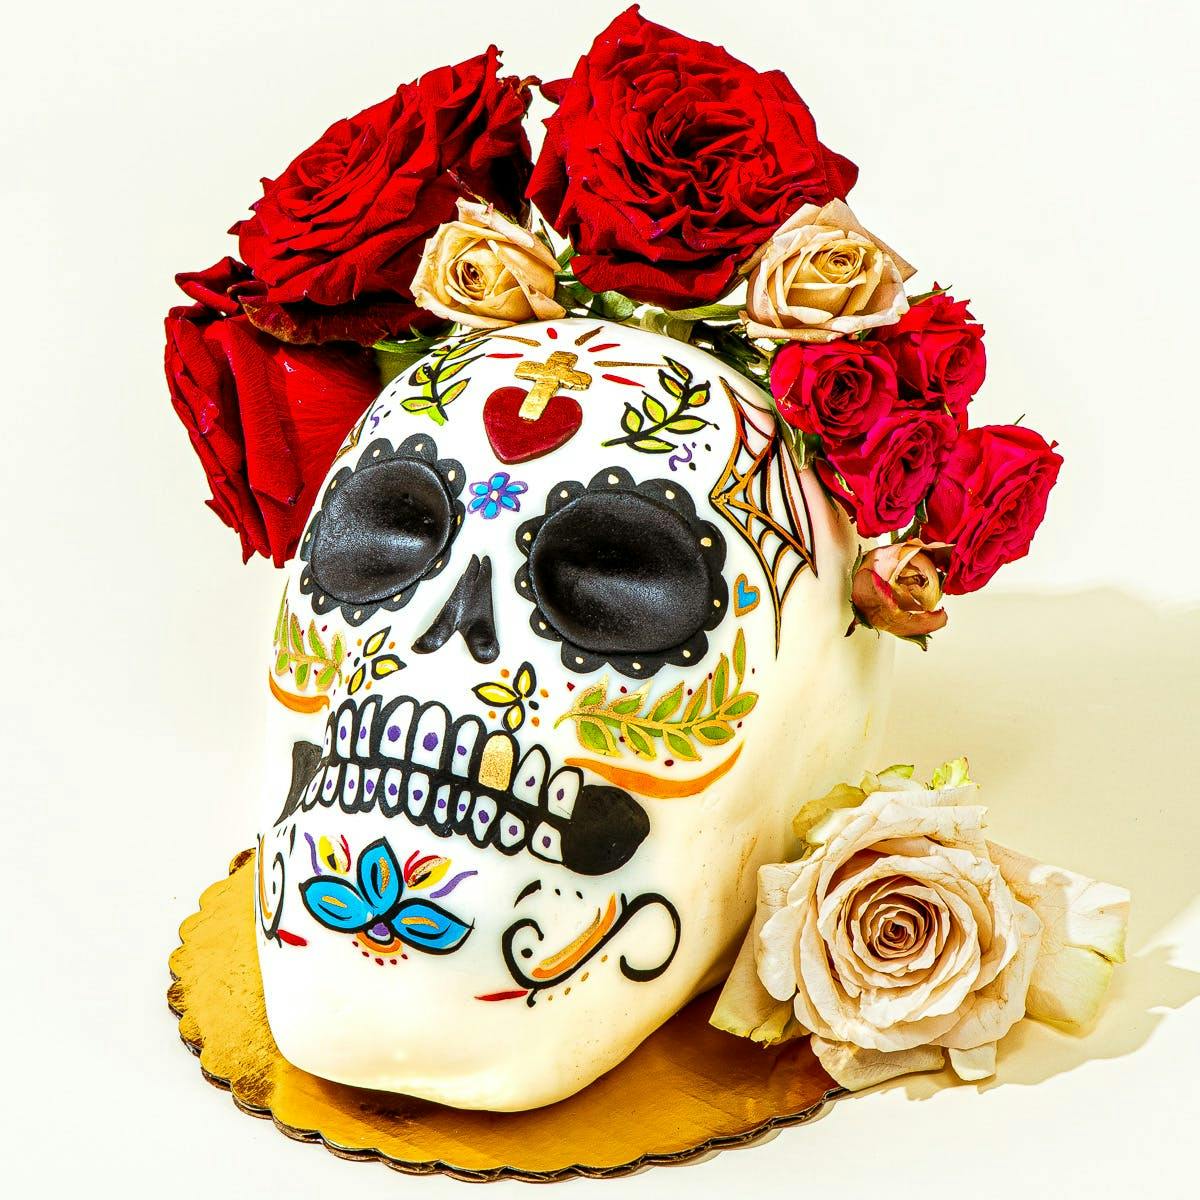 Skull cake topper edible party decoration gift muffin cupcake image roses |  eBay